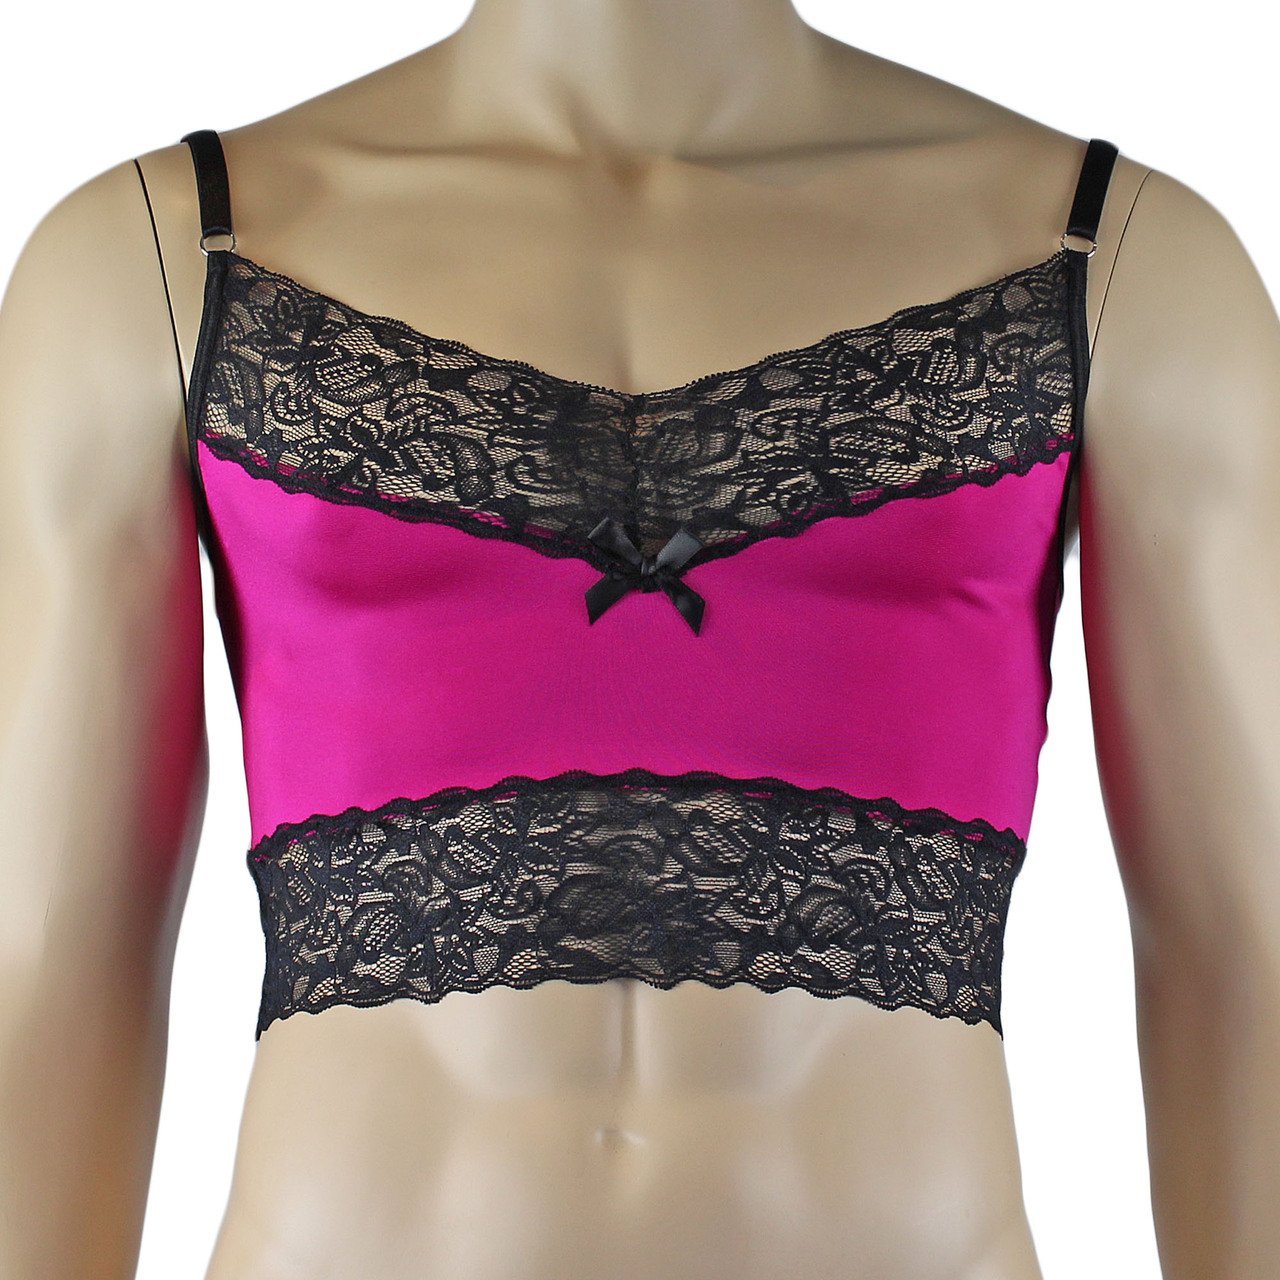 Mens Glamour Camisole Top and Pouch G string with Lace Trim - Sizes up to 3XL (raspberry & black plus other colours)